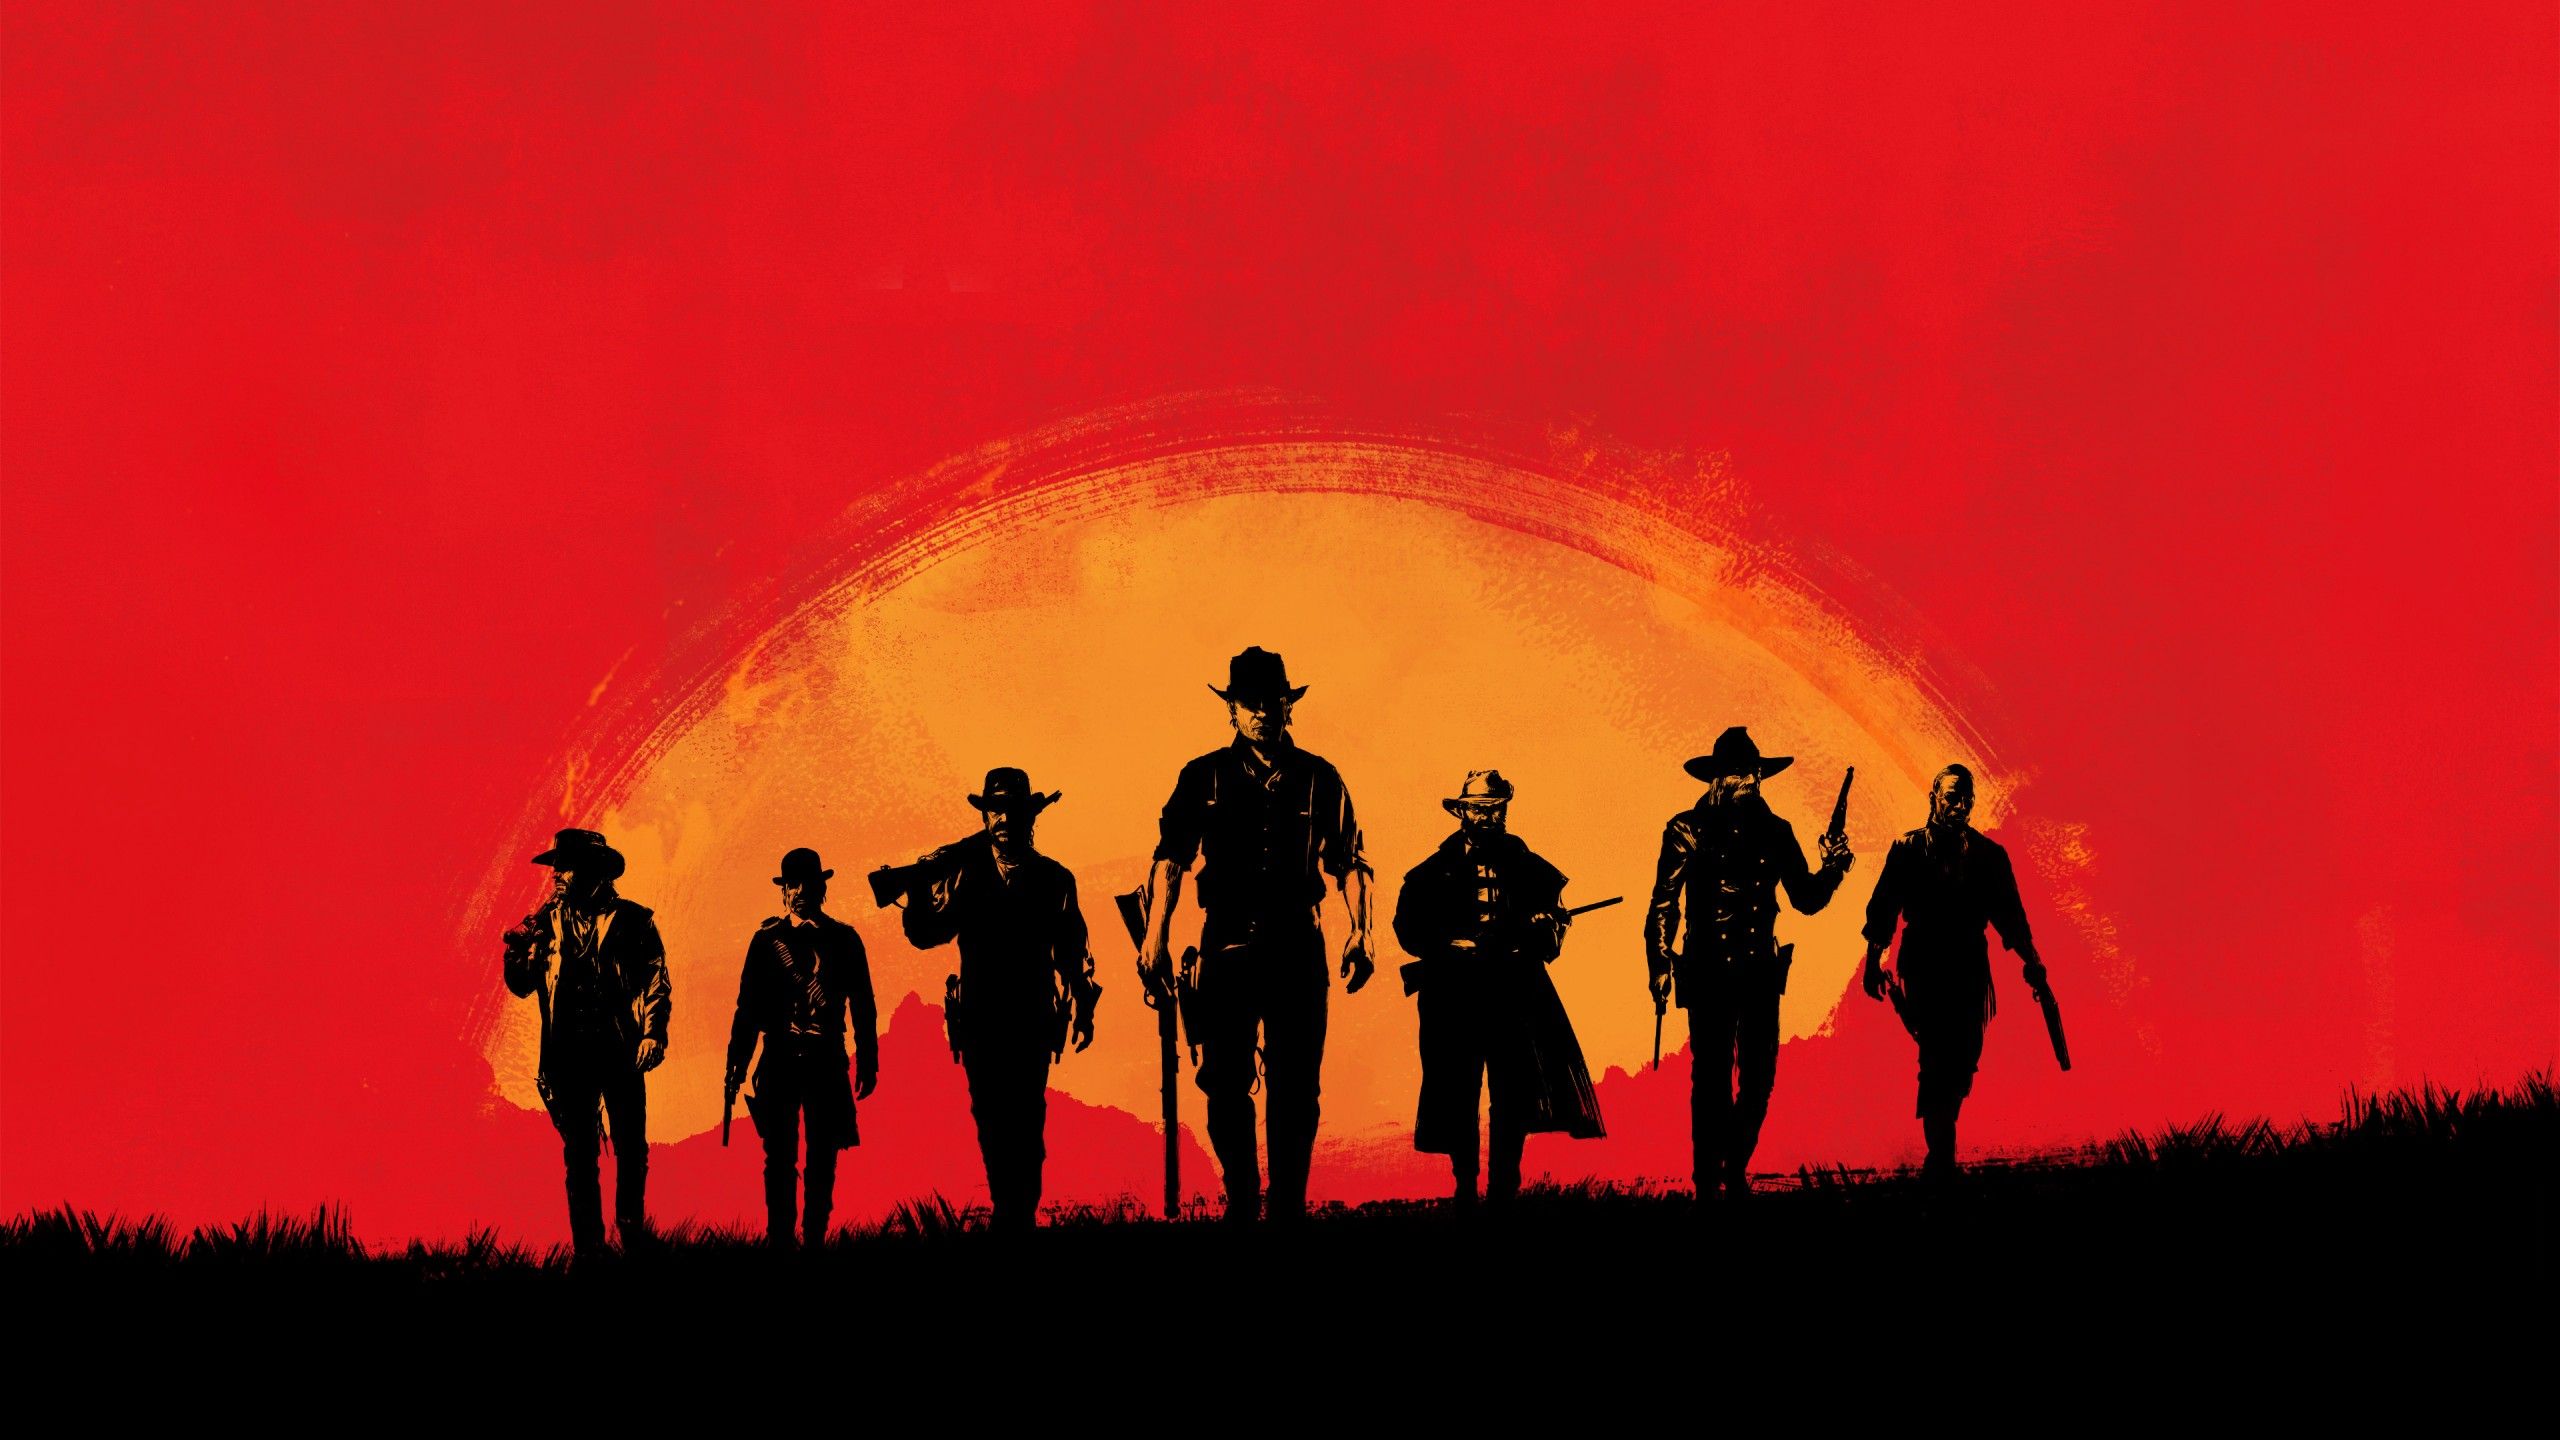 Wallpaper Red Dead Redemption Rockstar Games, 4K, Games,. Wallpaper for iPhone, Android, Mobile and Desktop